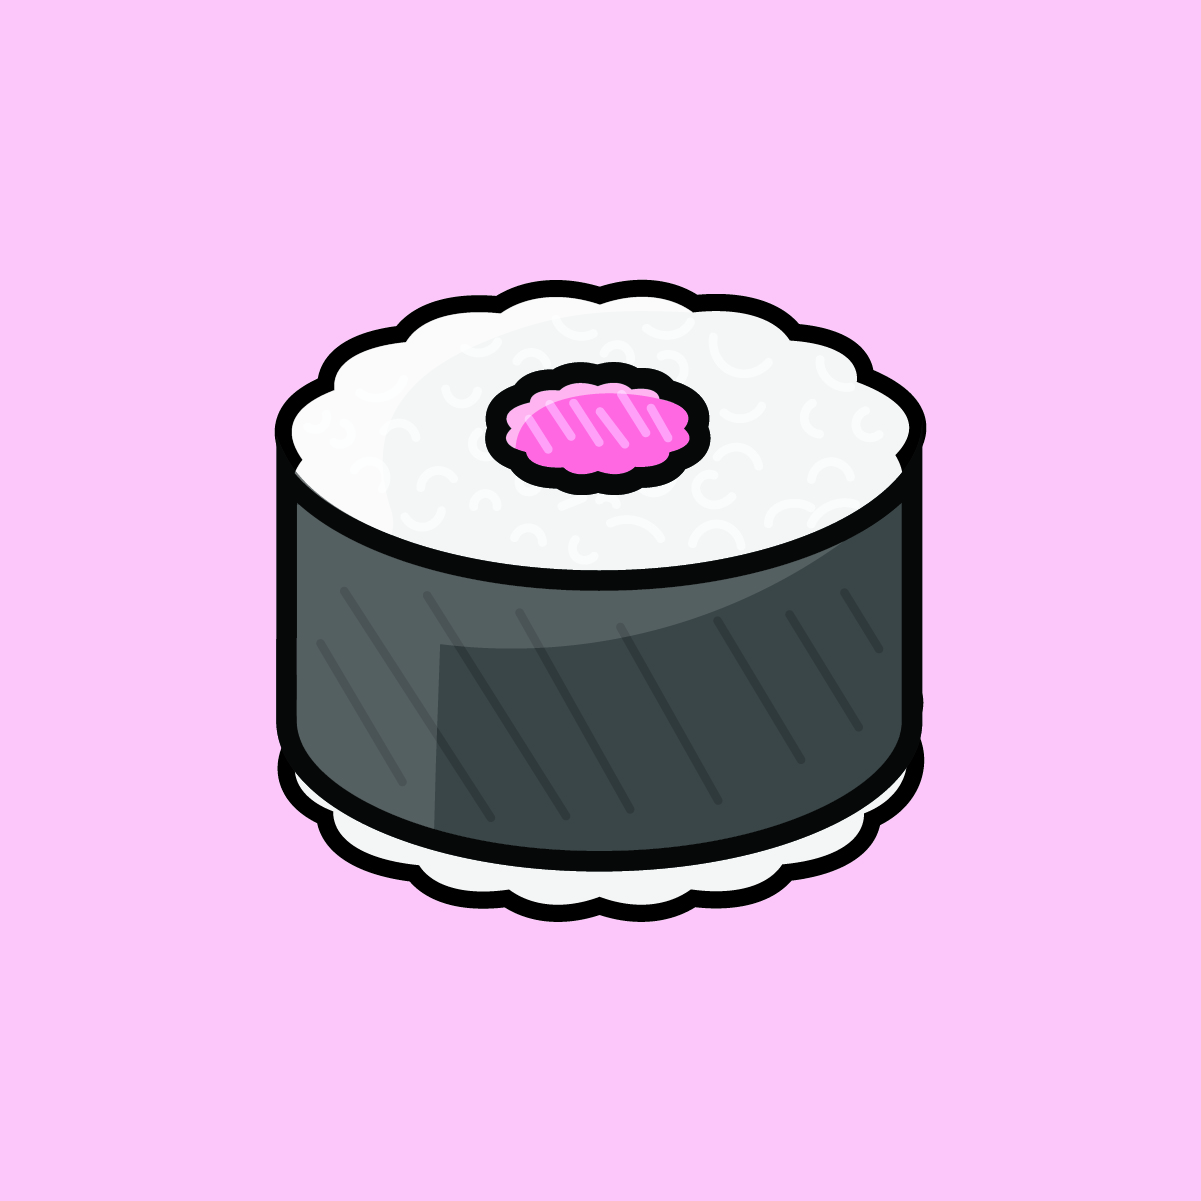 Piece of a sushi roll.